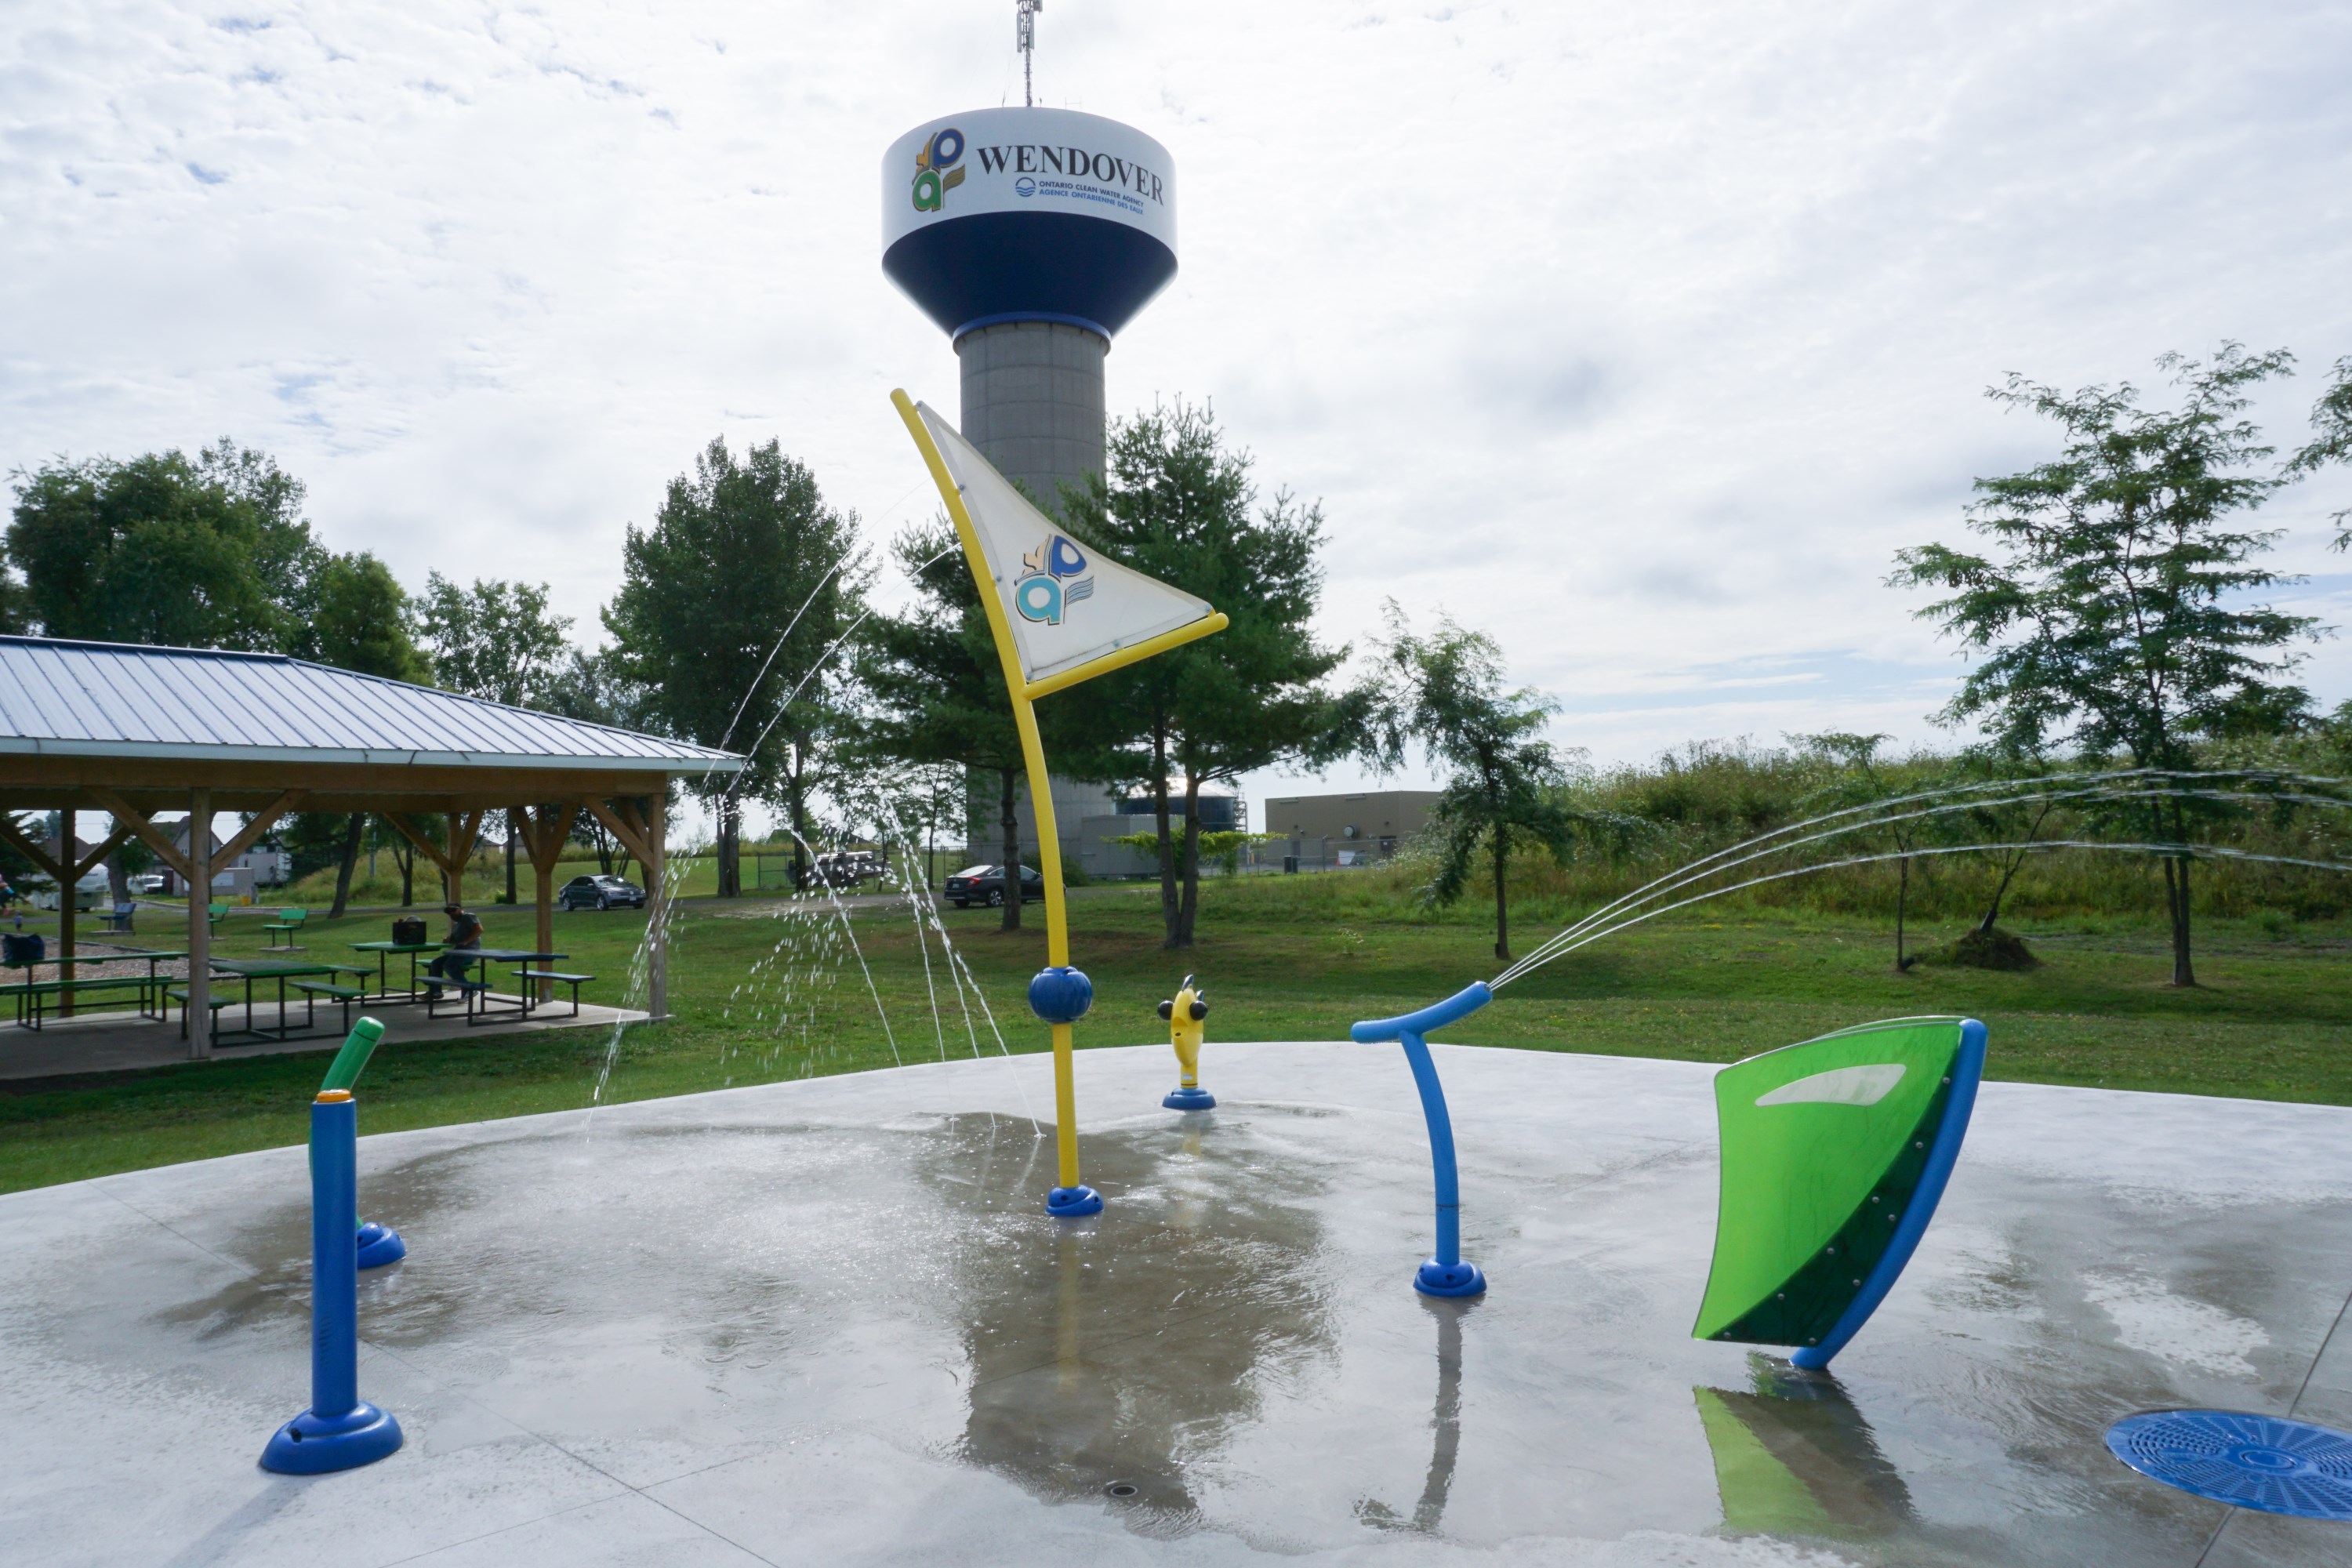 View of the Splashpad in Wendover, with the water tower in the back.